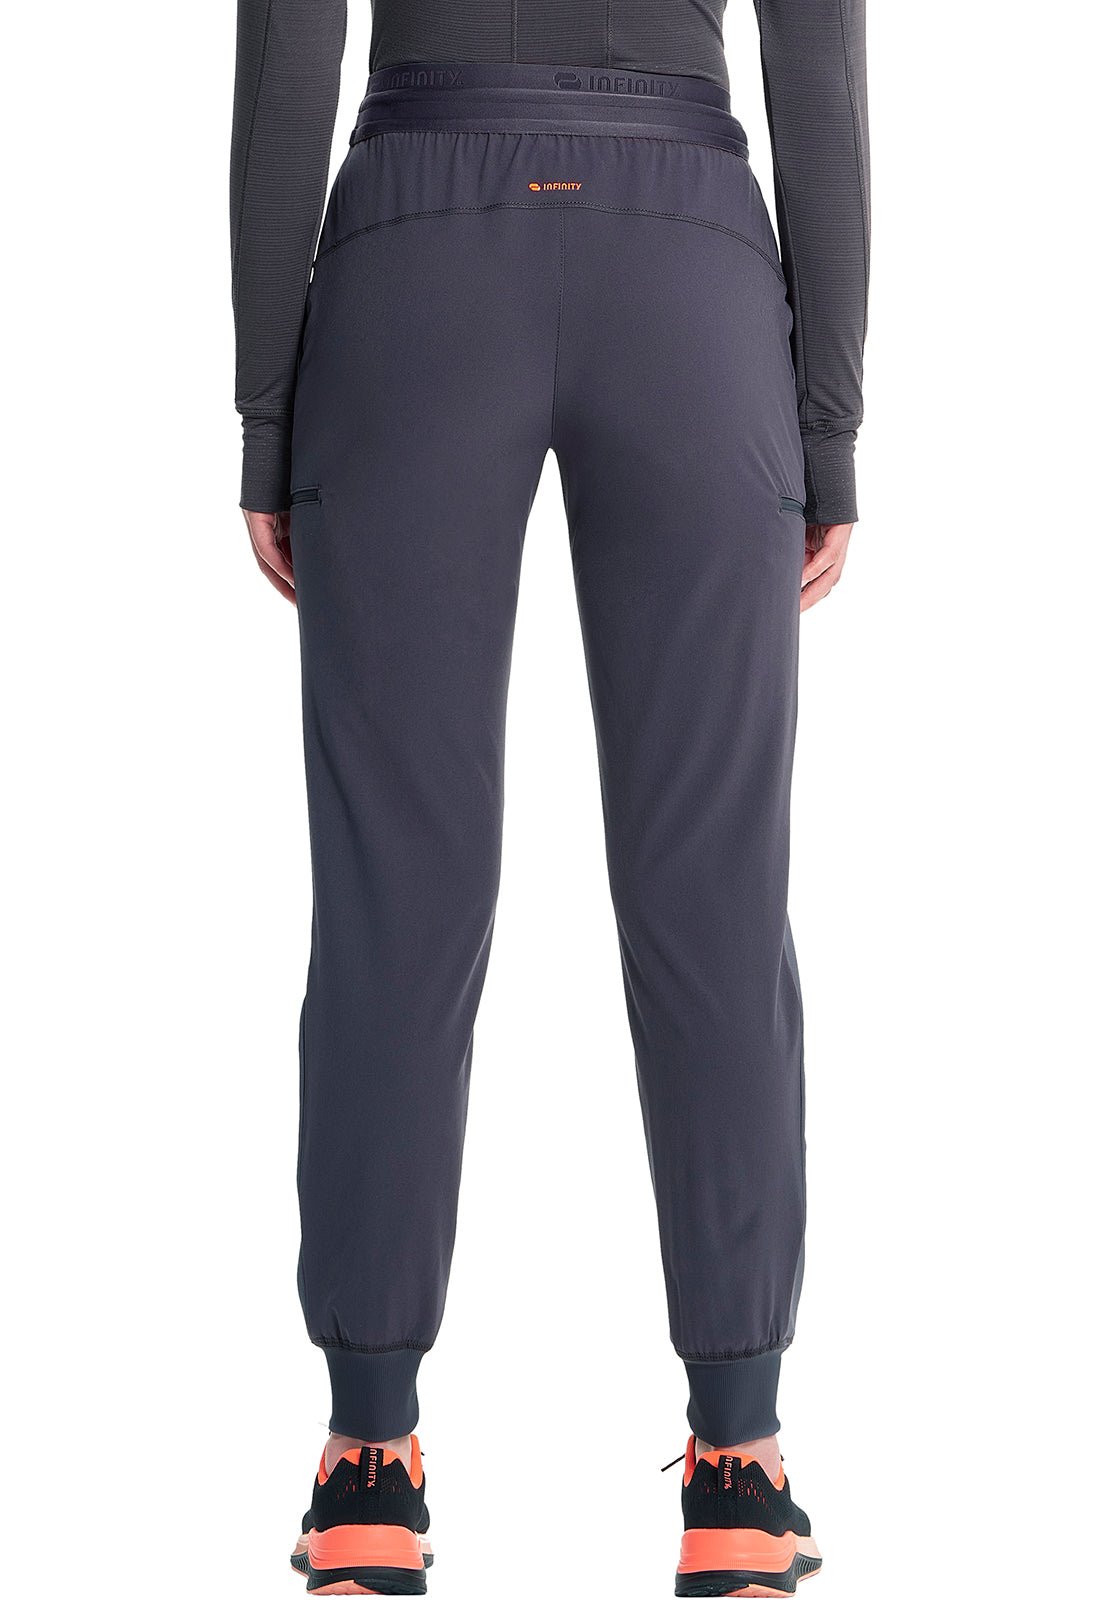 Cherokee Infinity GNR8 Jogger Pant IN122A in Black, Navy, Pewter, Royal - Scrubs Select